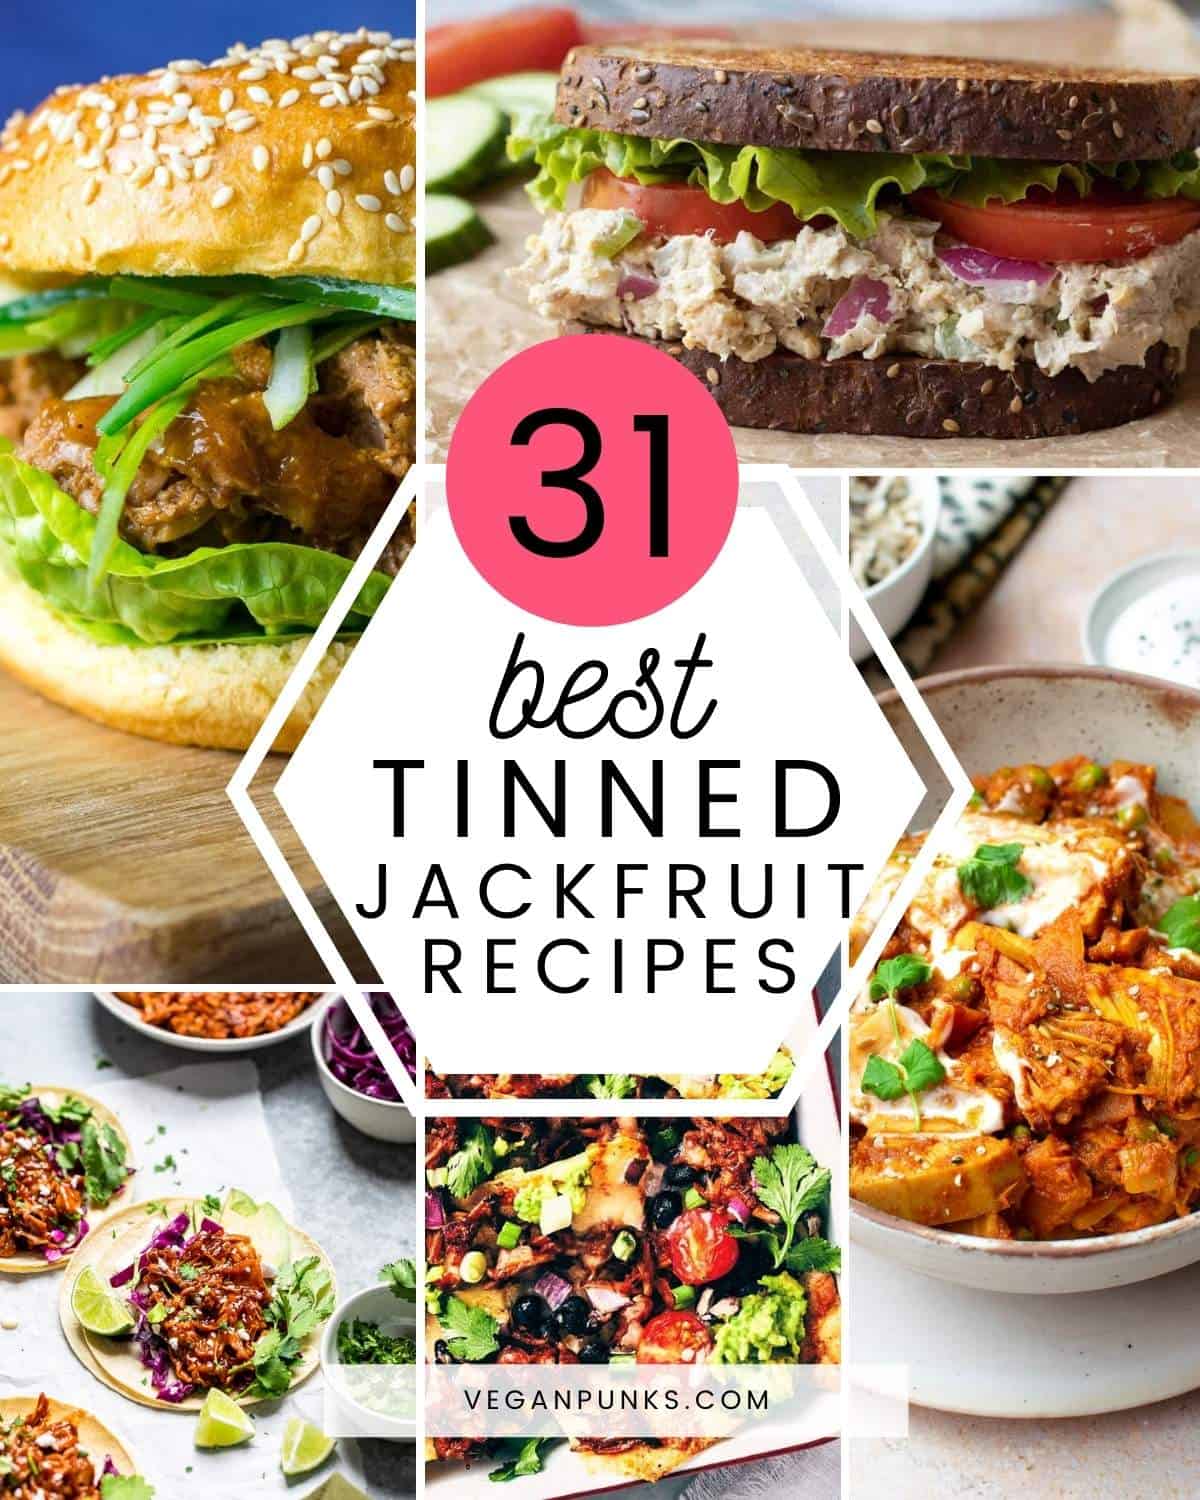 Collage with title 'Best tinned jackfruit recipes' as well as images of jackfruit dishes.